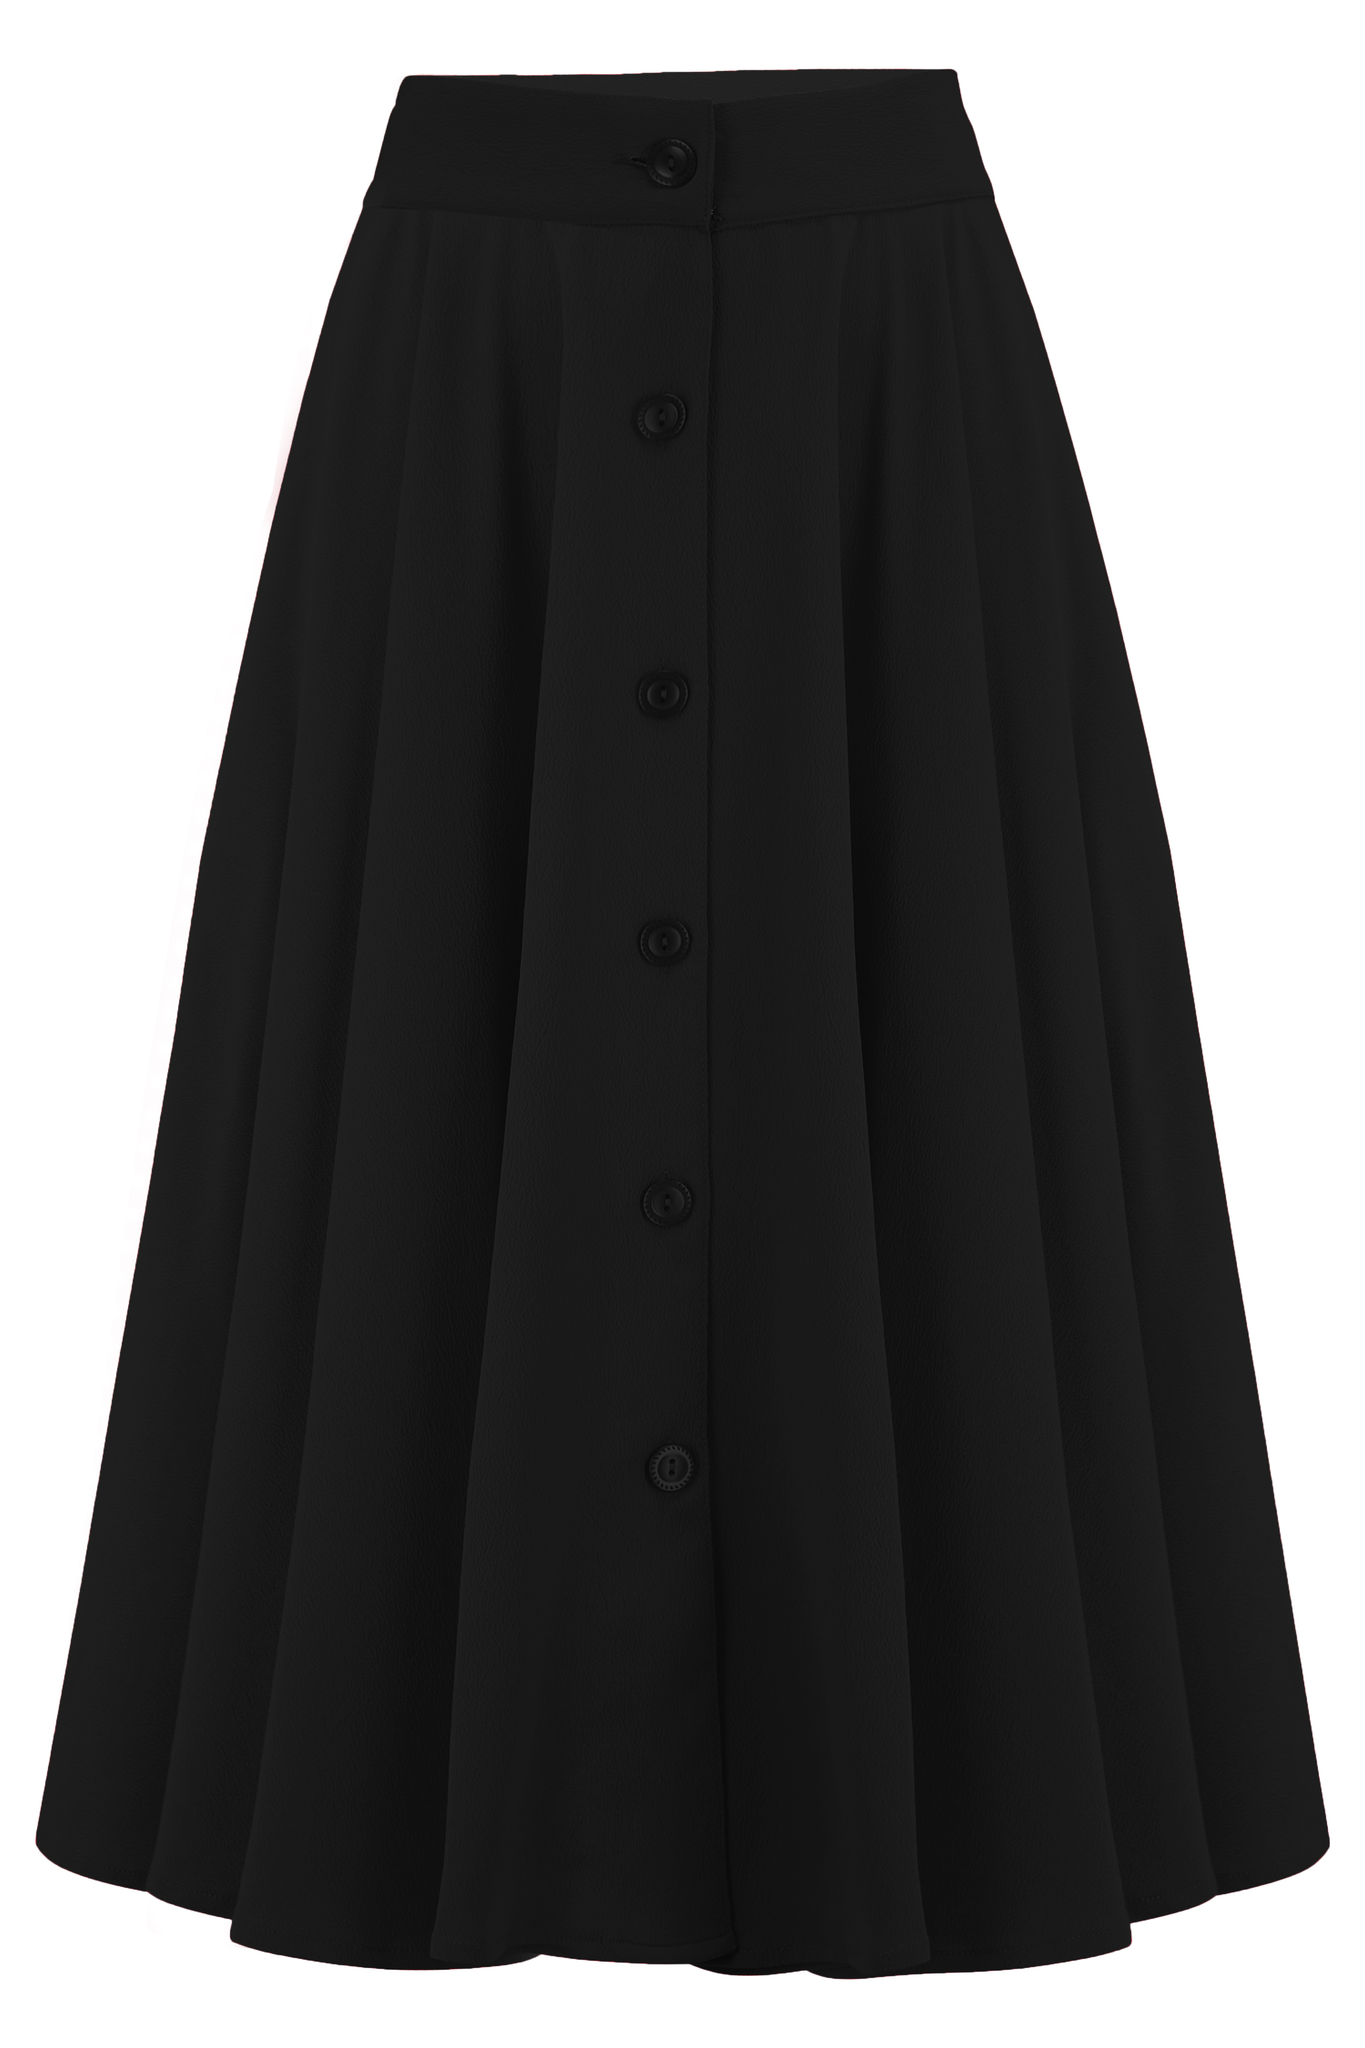 The "Beverly" Button Front Full Circle Skirt with Pockets in Solid Black, Authentic 1950s Vintage Style - True and authentic vintage style clothing, inspired by the Classic styles of CC41 , WW2 and the fun 1950s RocknRoll era, for everyday wear plus events like Goodwood Revival, Twinwood Festival and Viva Las Vegas Rockabilly Weekend Rock n Romance Rock n Romance